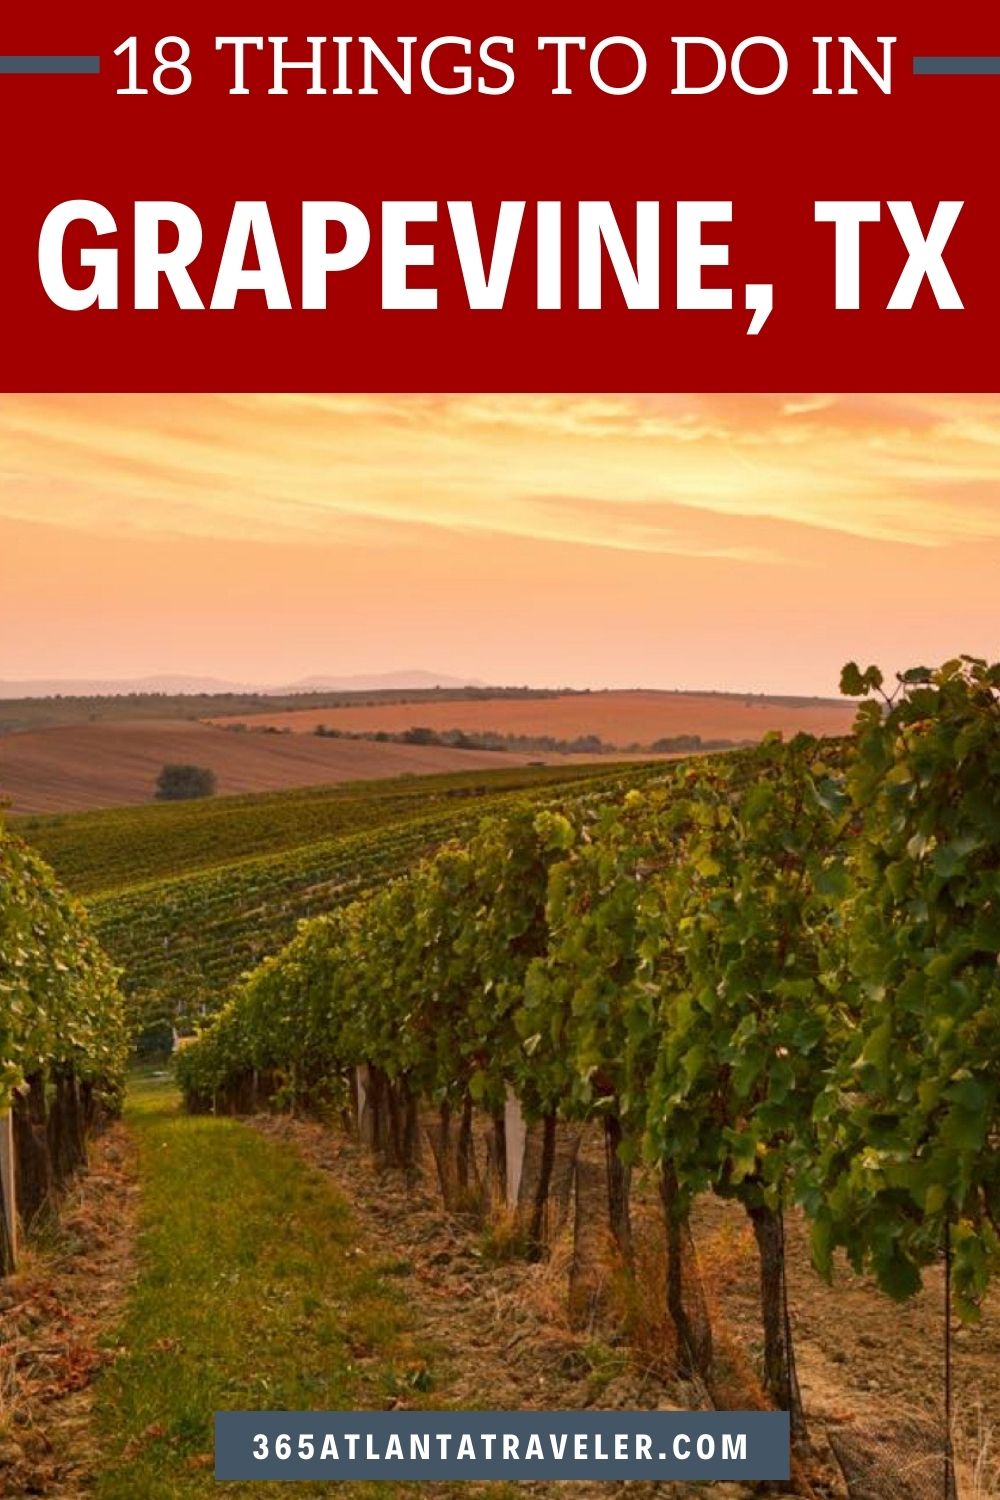 18 PHENOMENAL THINGS TO DO IN GRAPEVINE TX